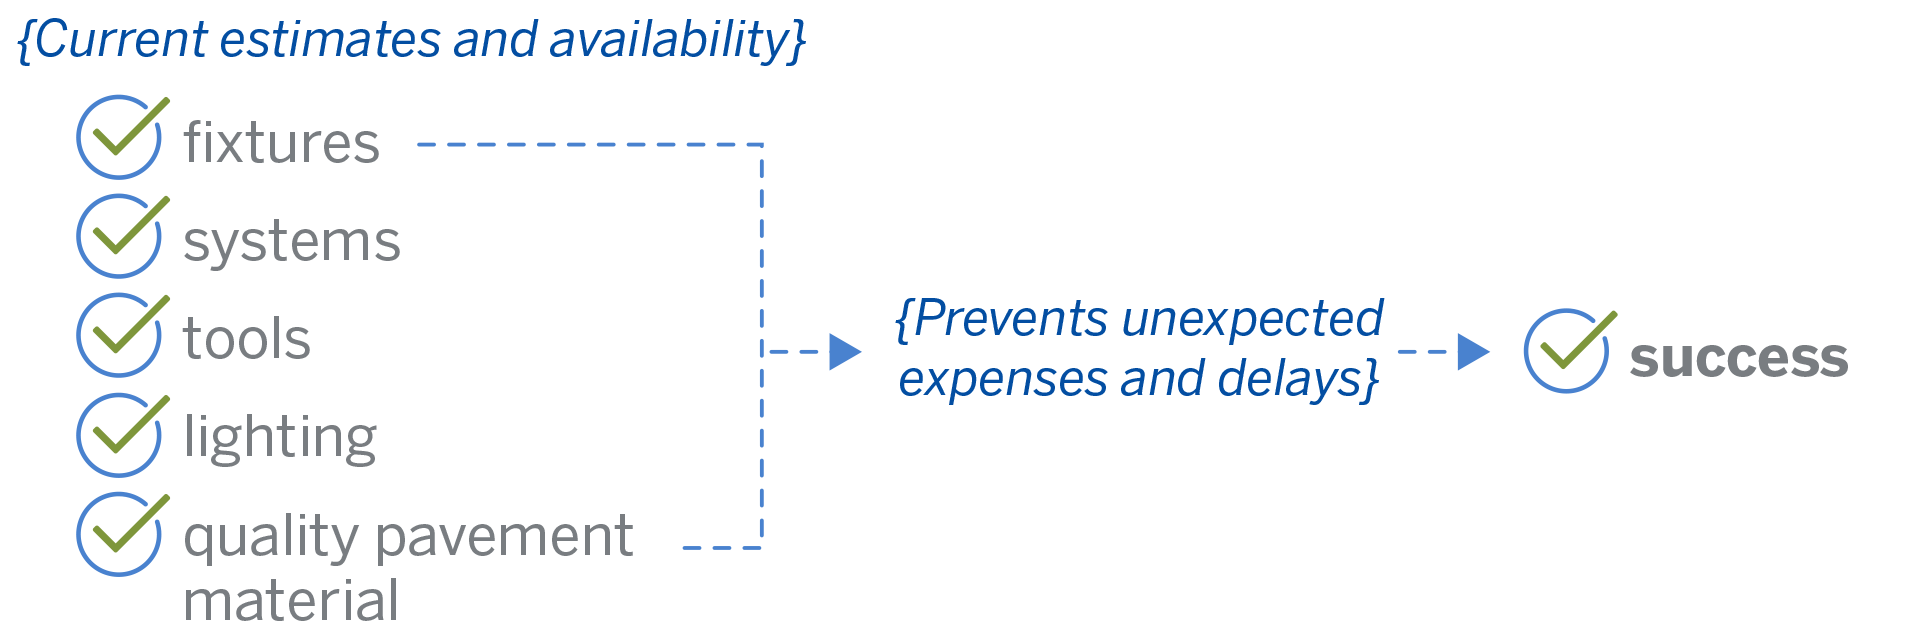 Having current estimates and availability will precent unexpected delays and expenses, resulting in success graphic